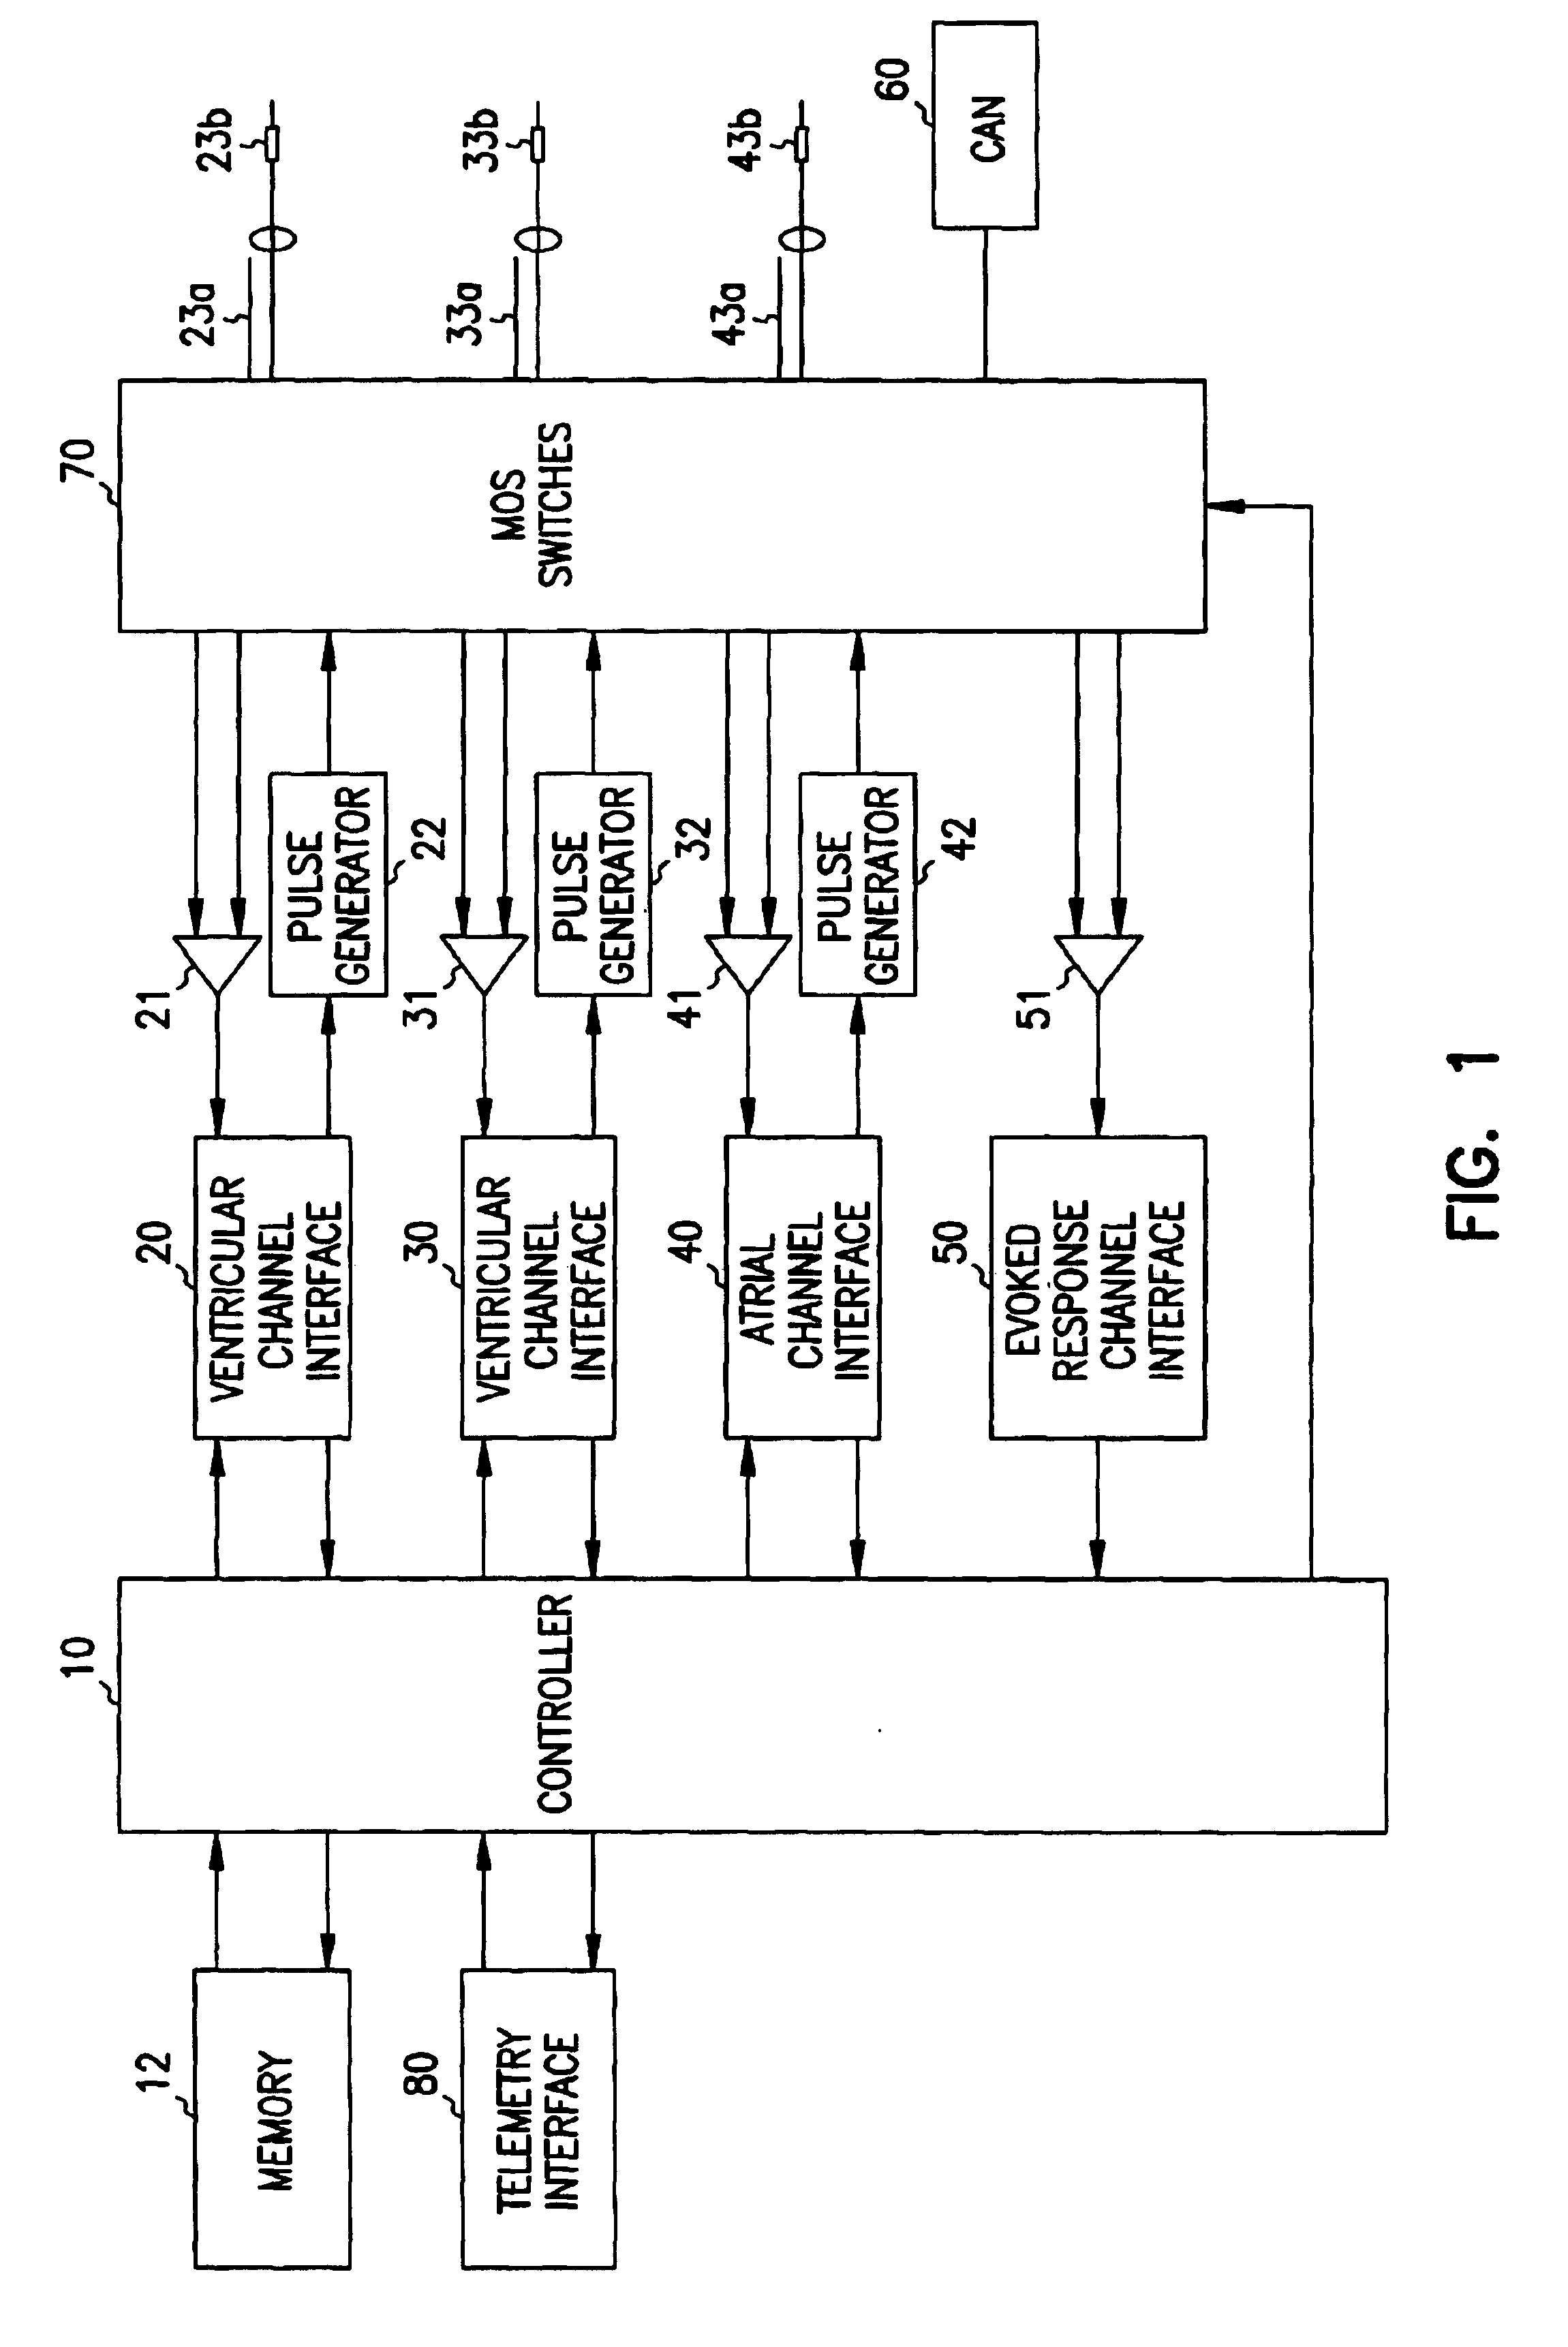 System and method for verifying capture in a multi-site pacemaker